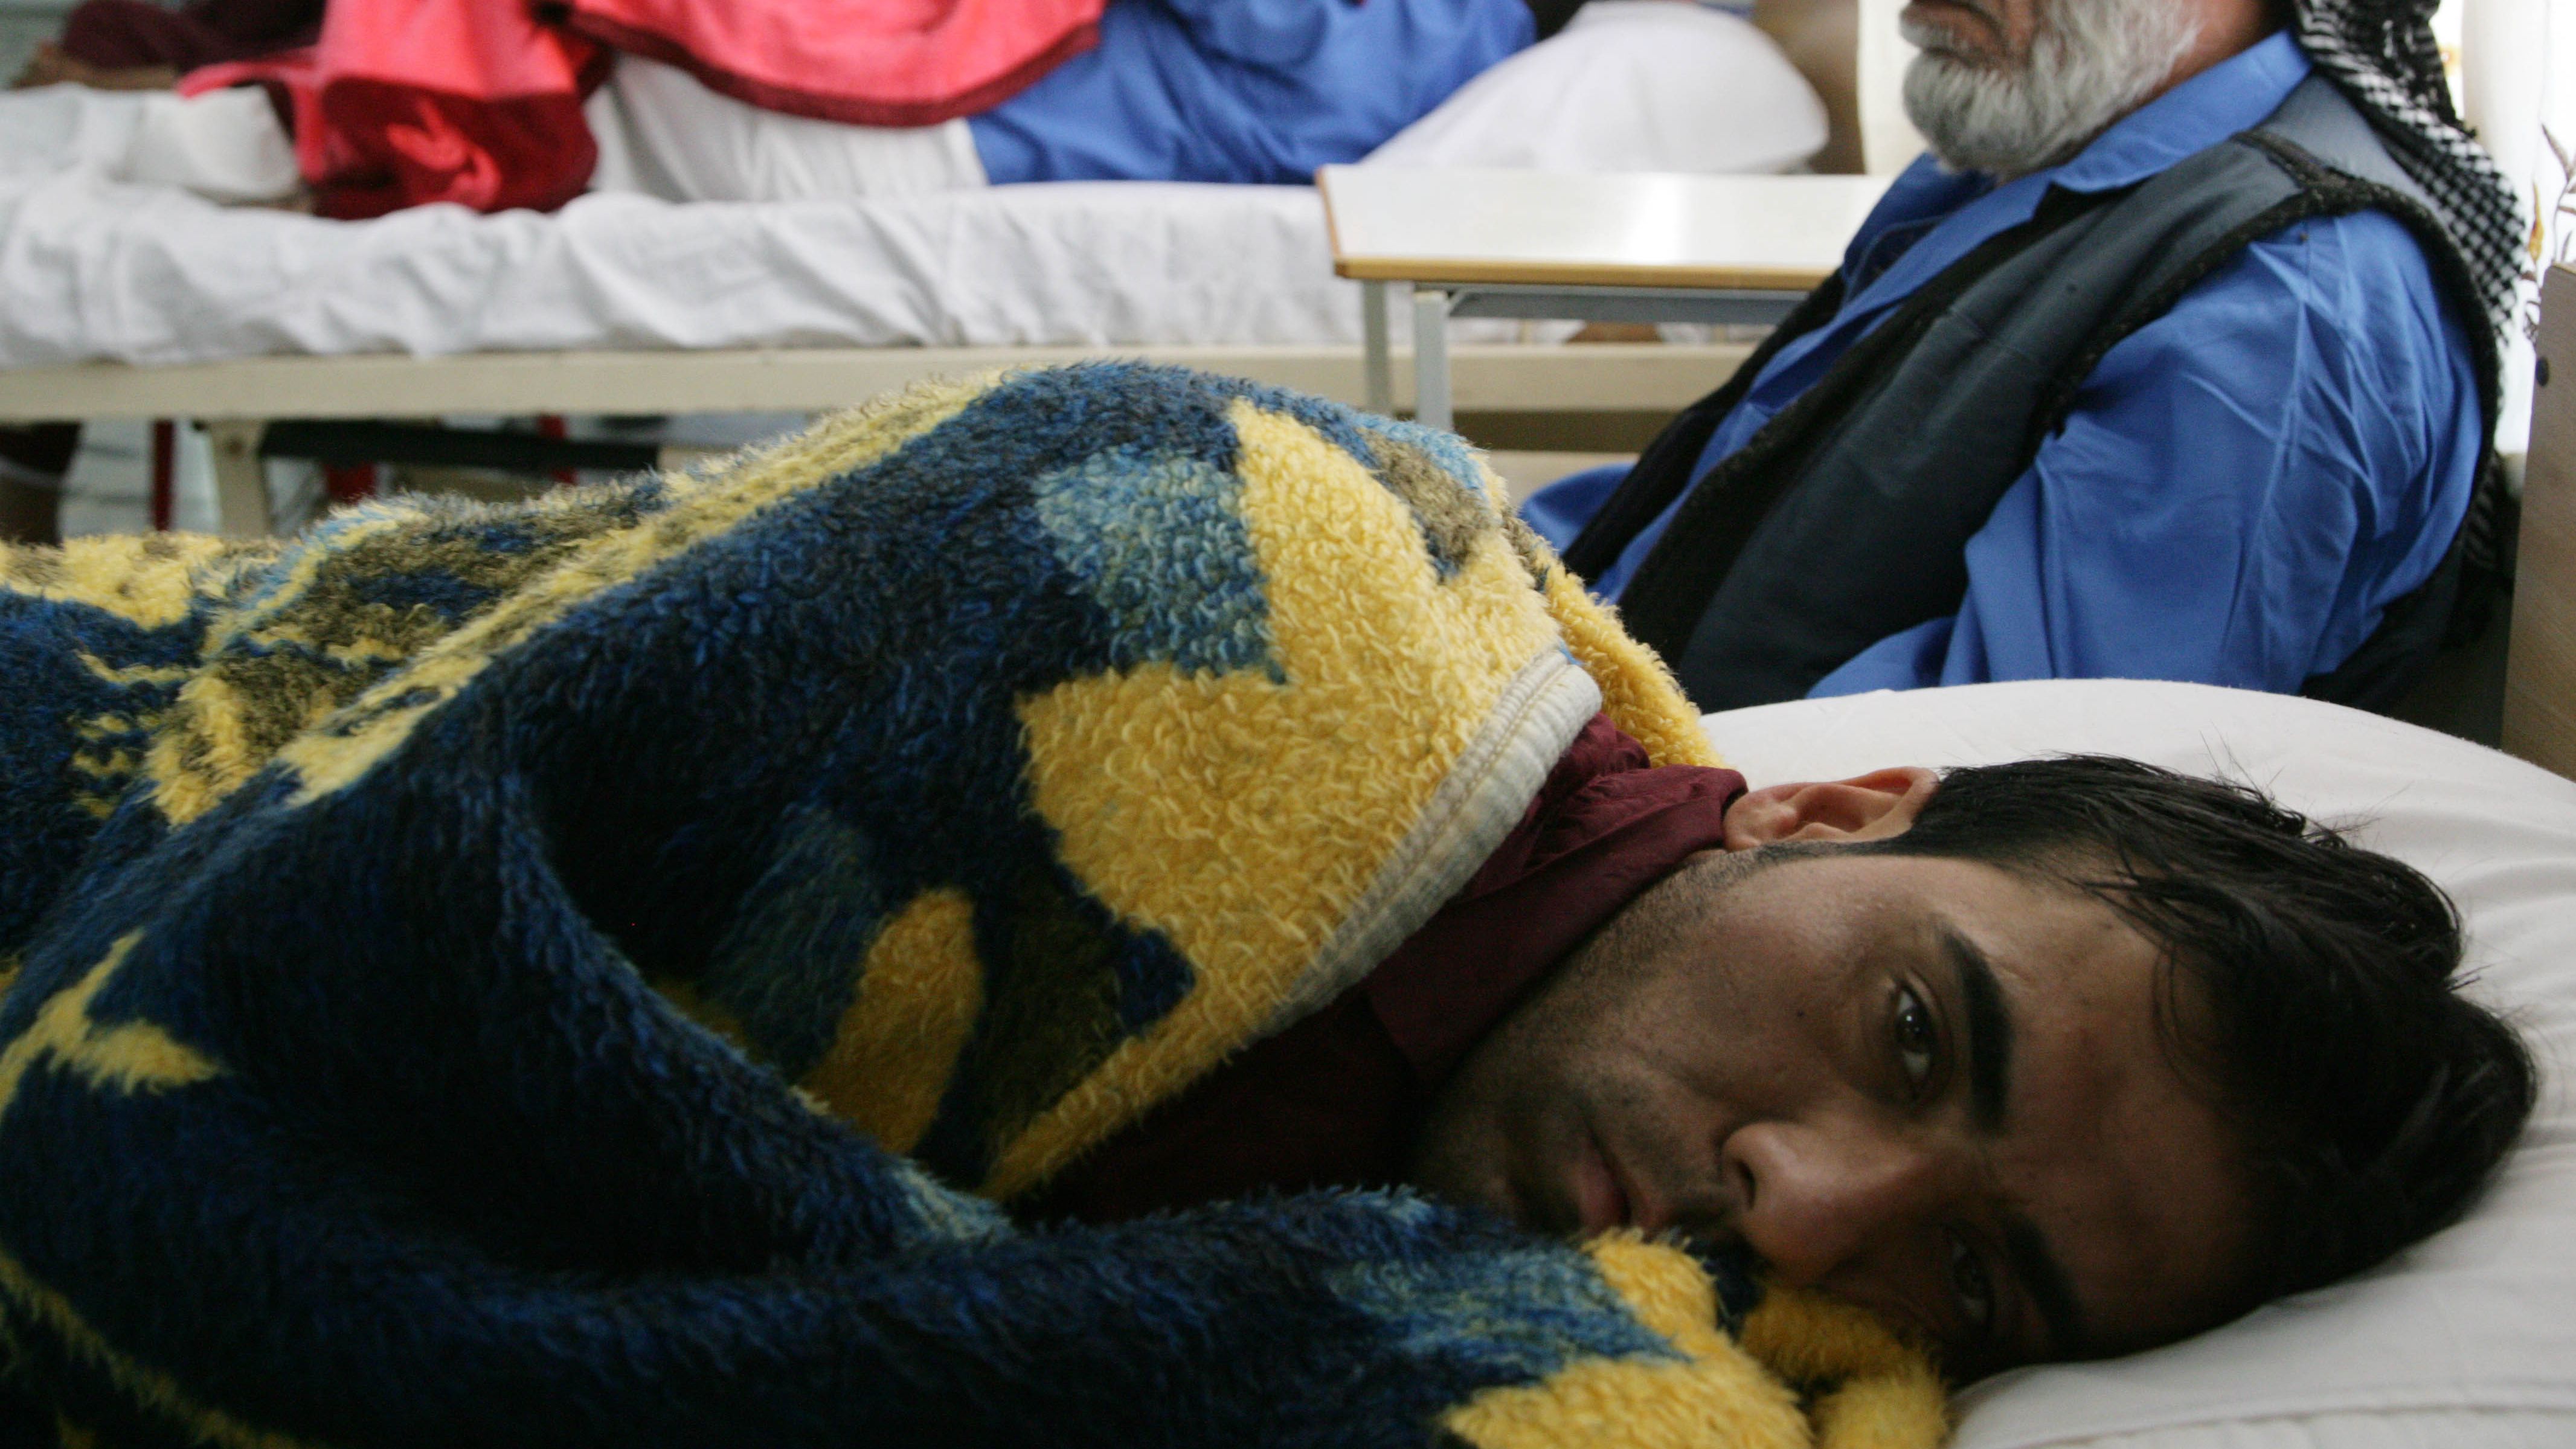 Wounded Iraqi men rest at a hospital in the northern Iraqi city of Arbil on April 25, 2013.